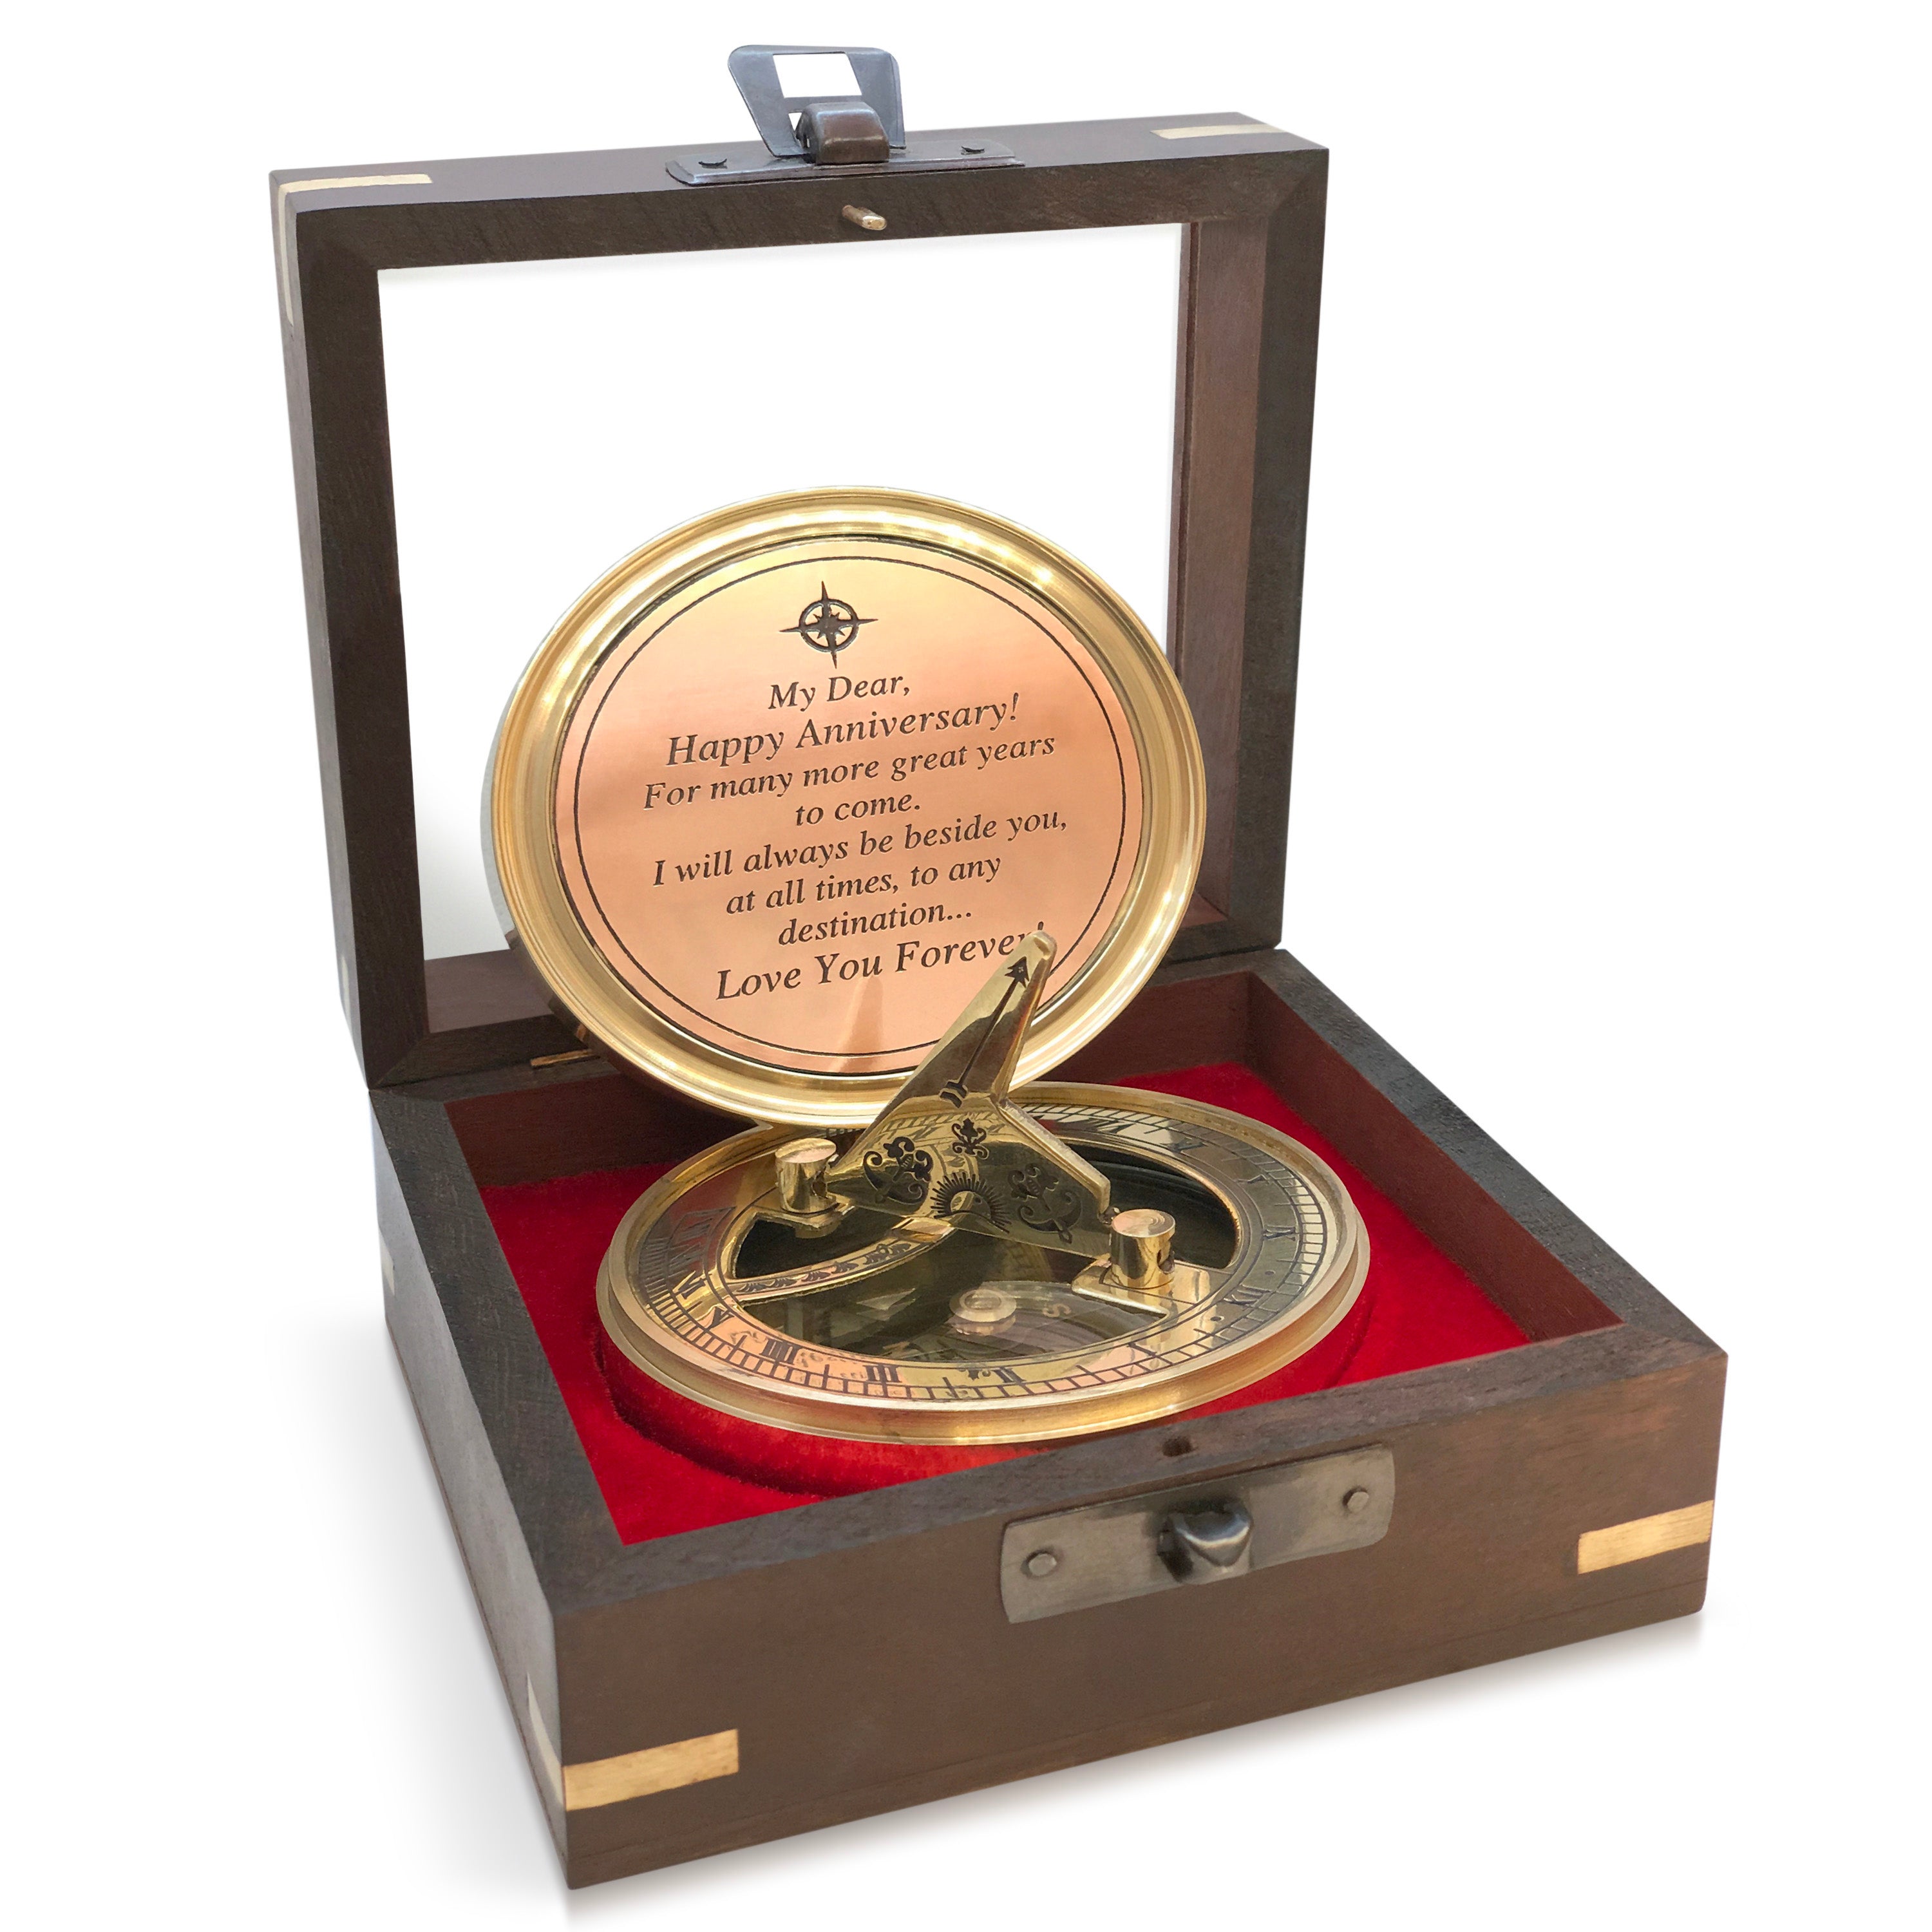 OakiWay Anniversary Sundial Compass - Amazing Anniversary Gift For Your Spouse